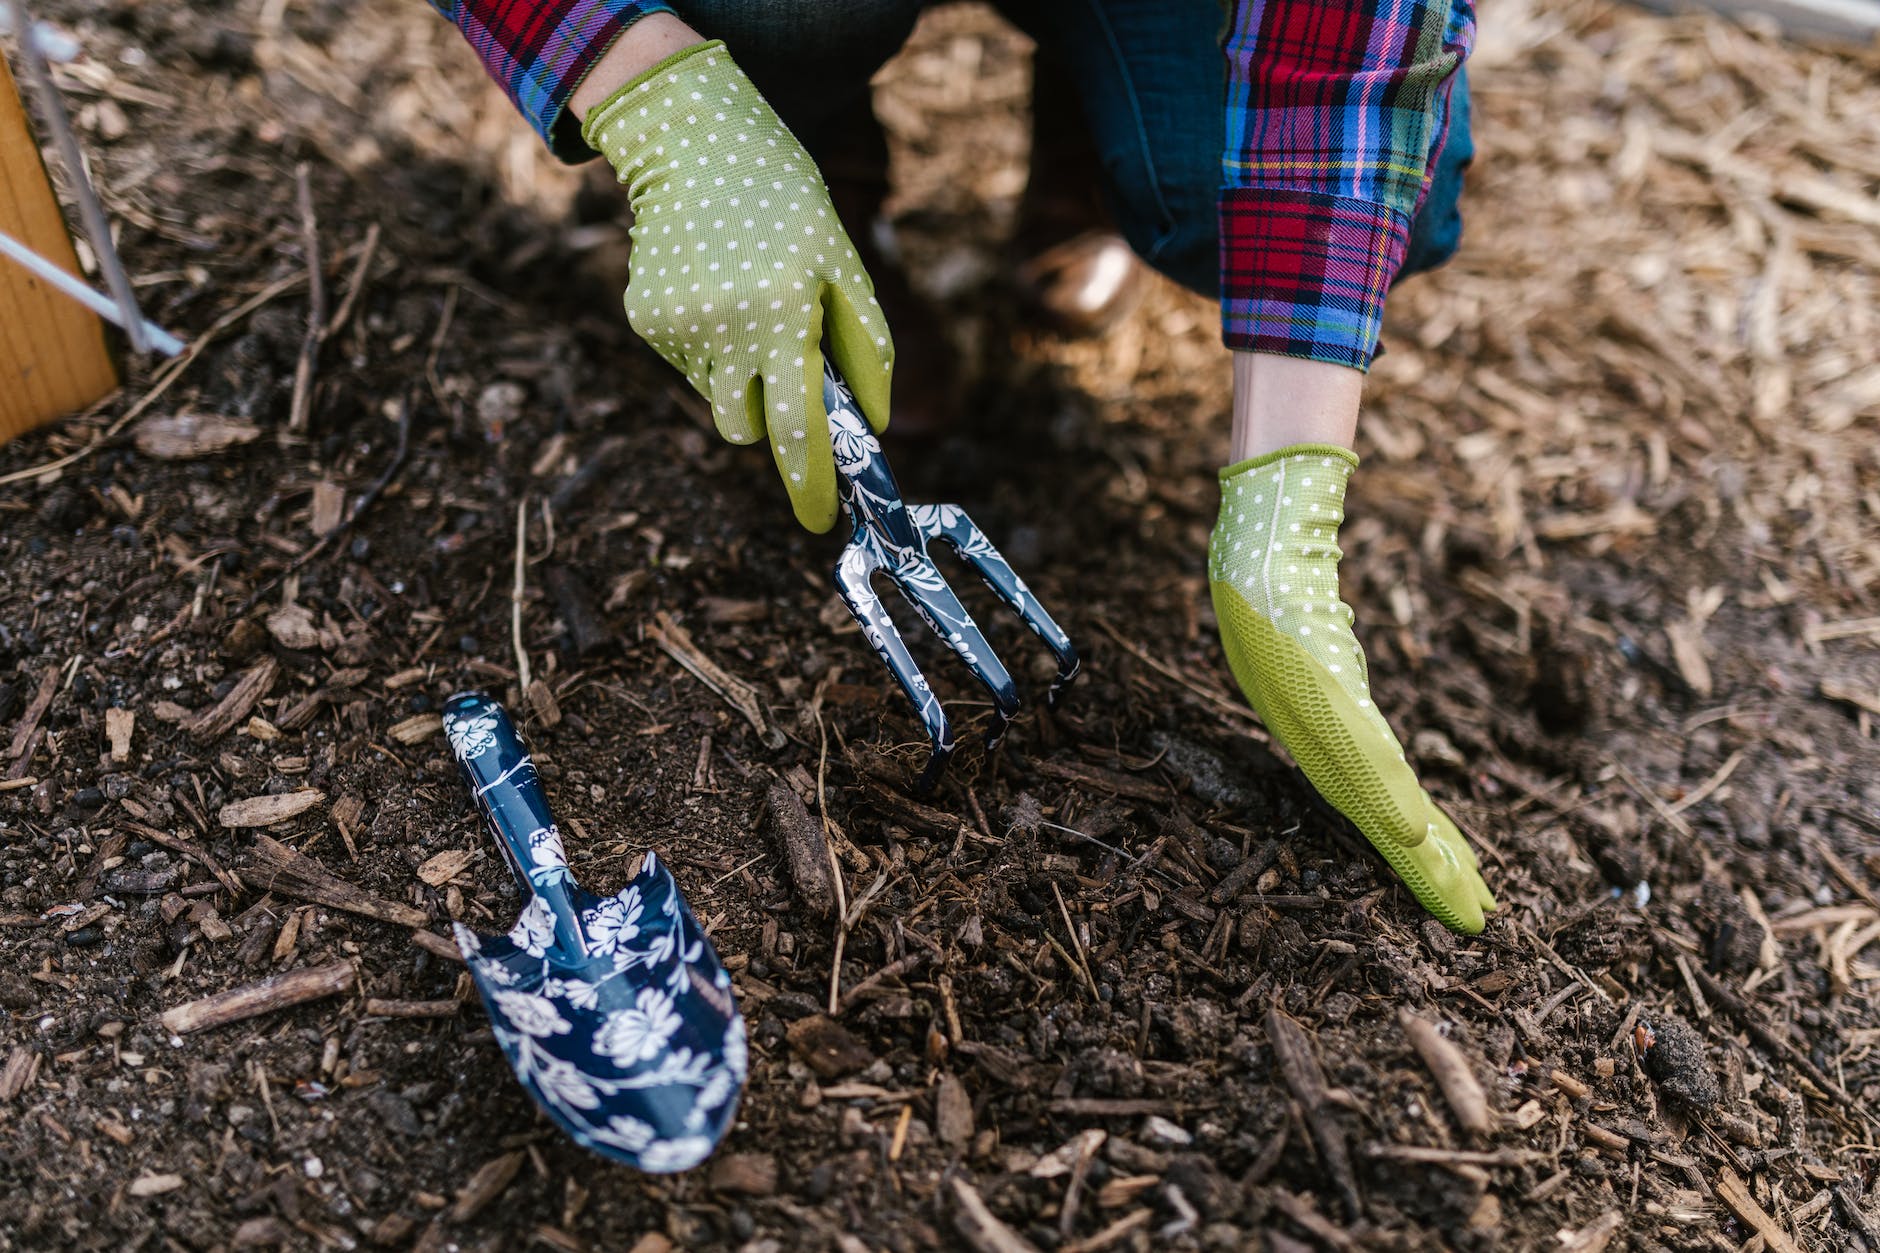 person wearing green gloves holding garden tools